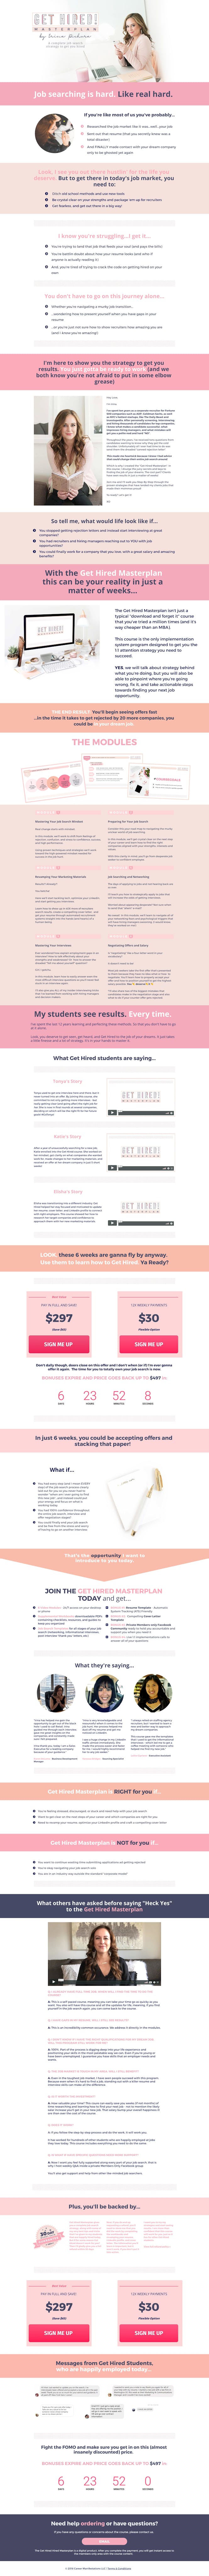 best sales page landing page examples 2018